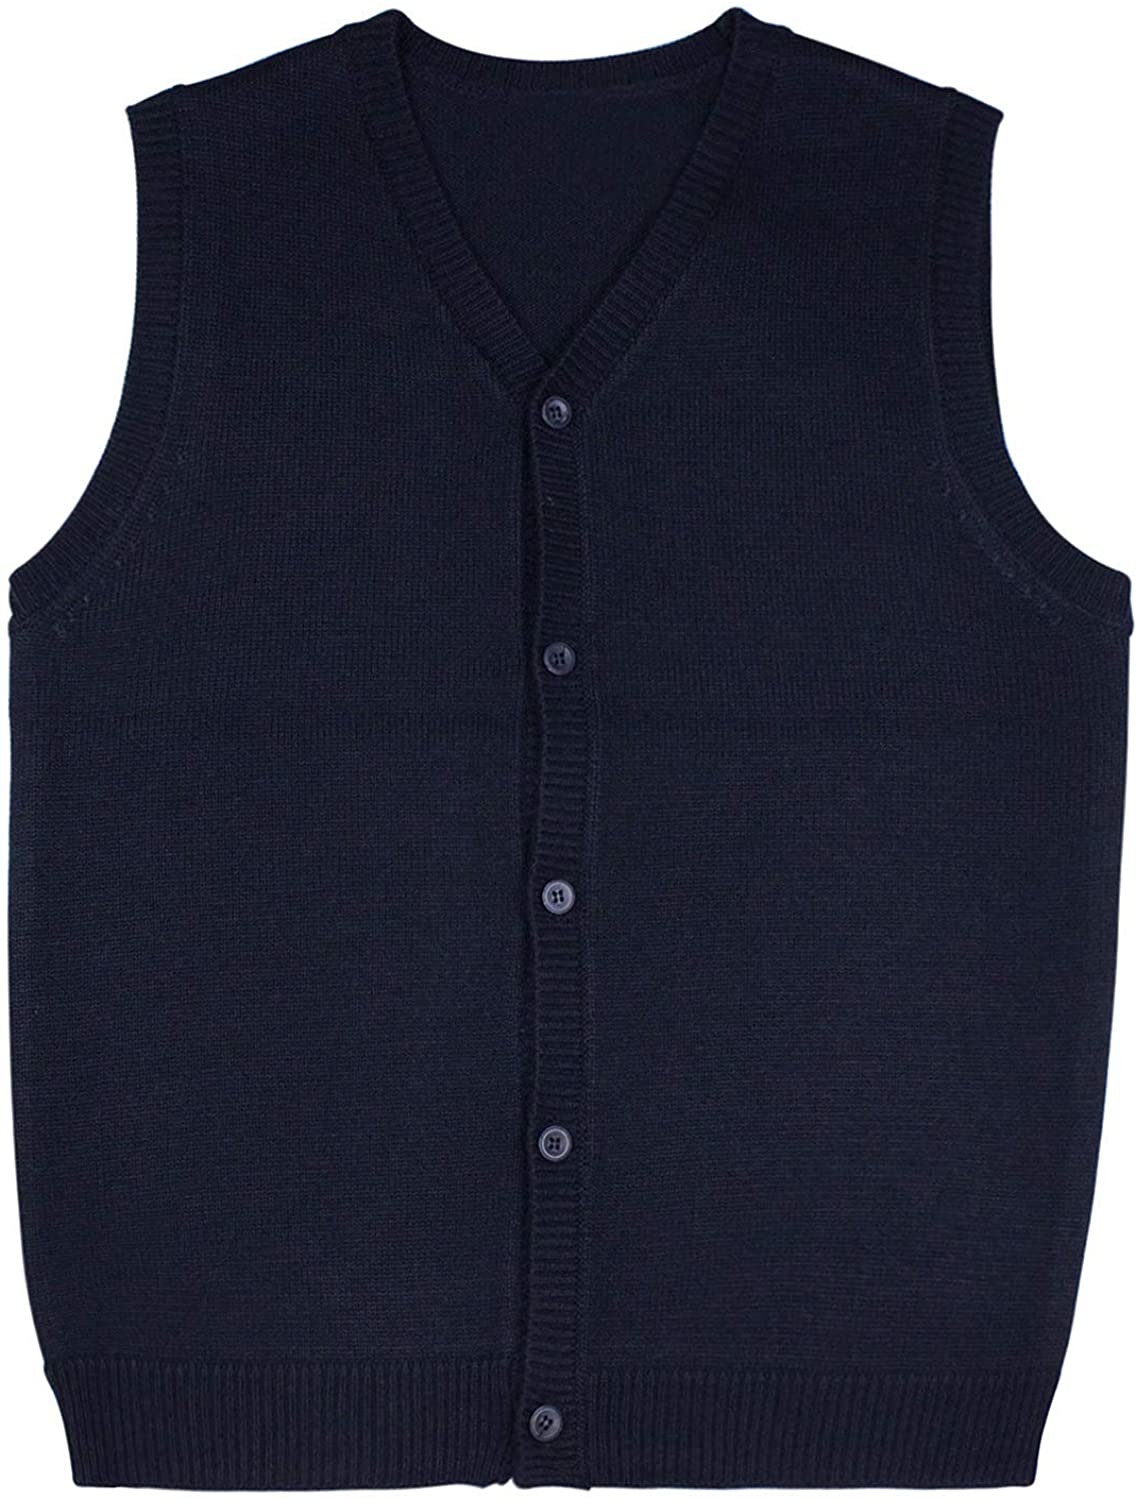 Mini Phoebee Men's Merino Wool Blend Relax Fit Sweater Vest V-Neck with Front Button 